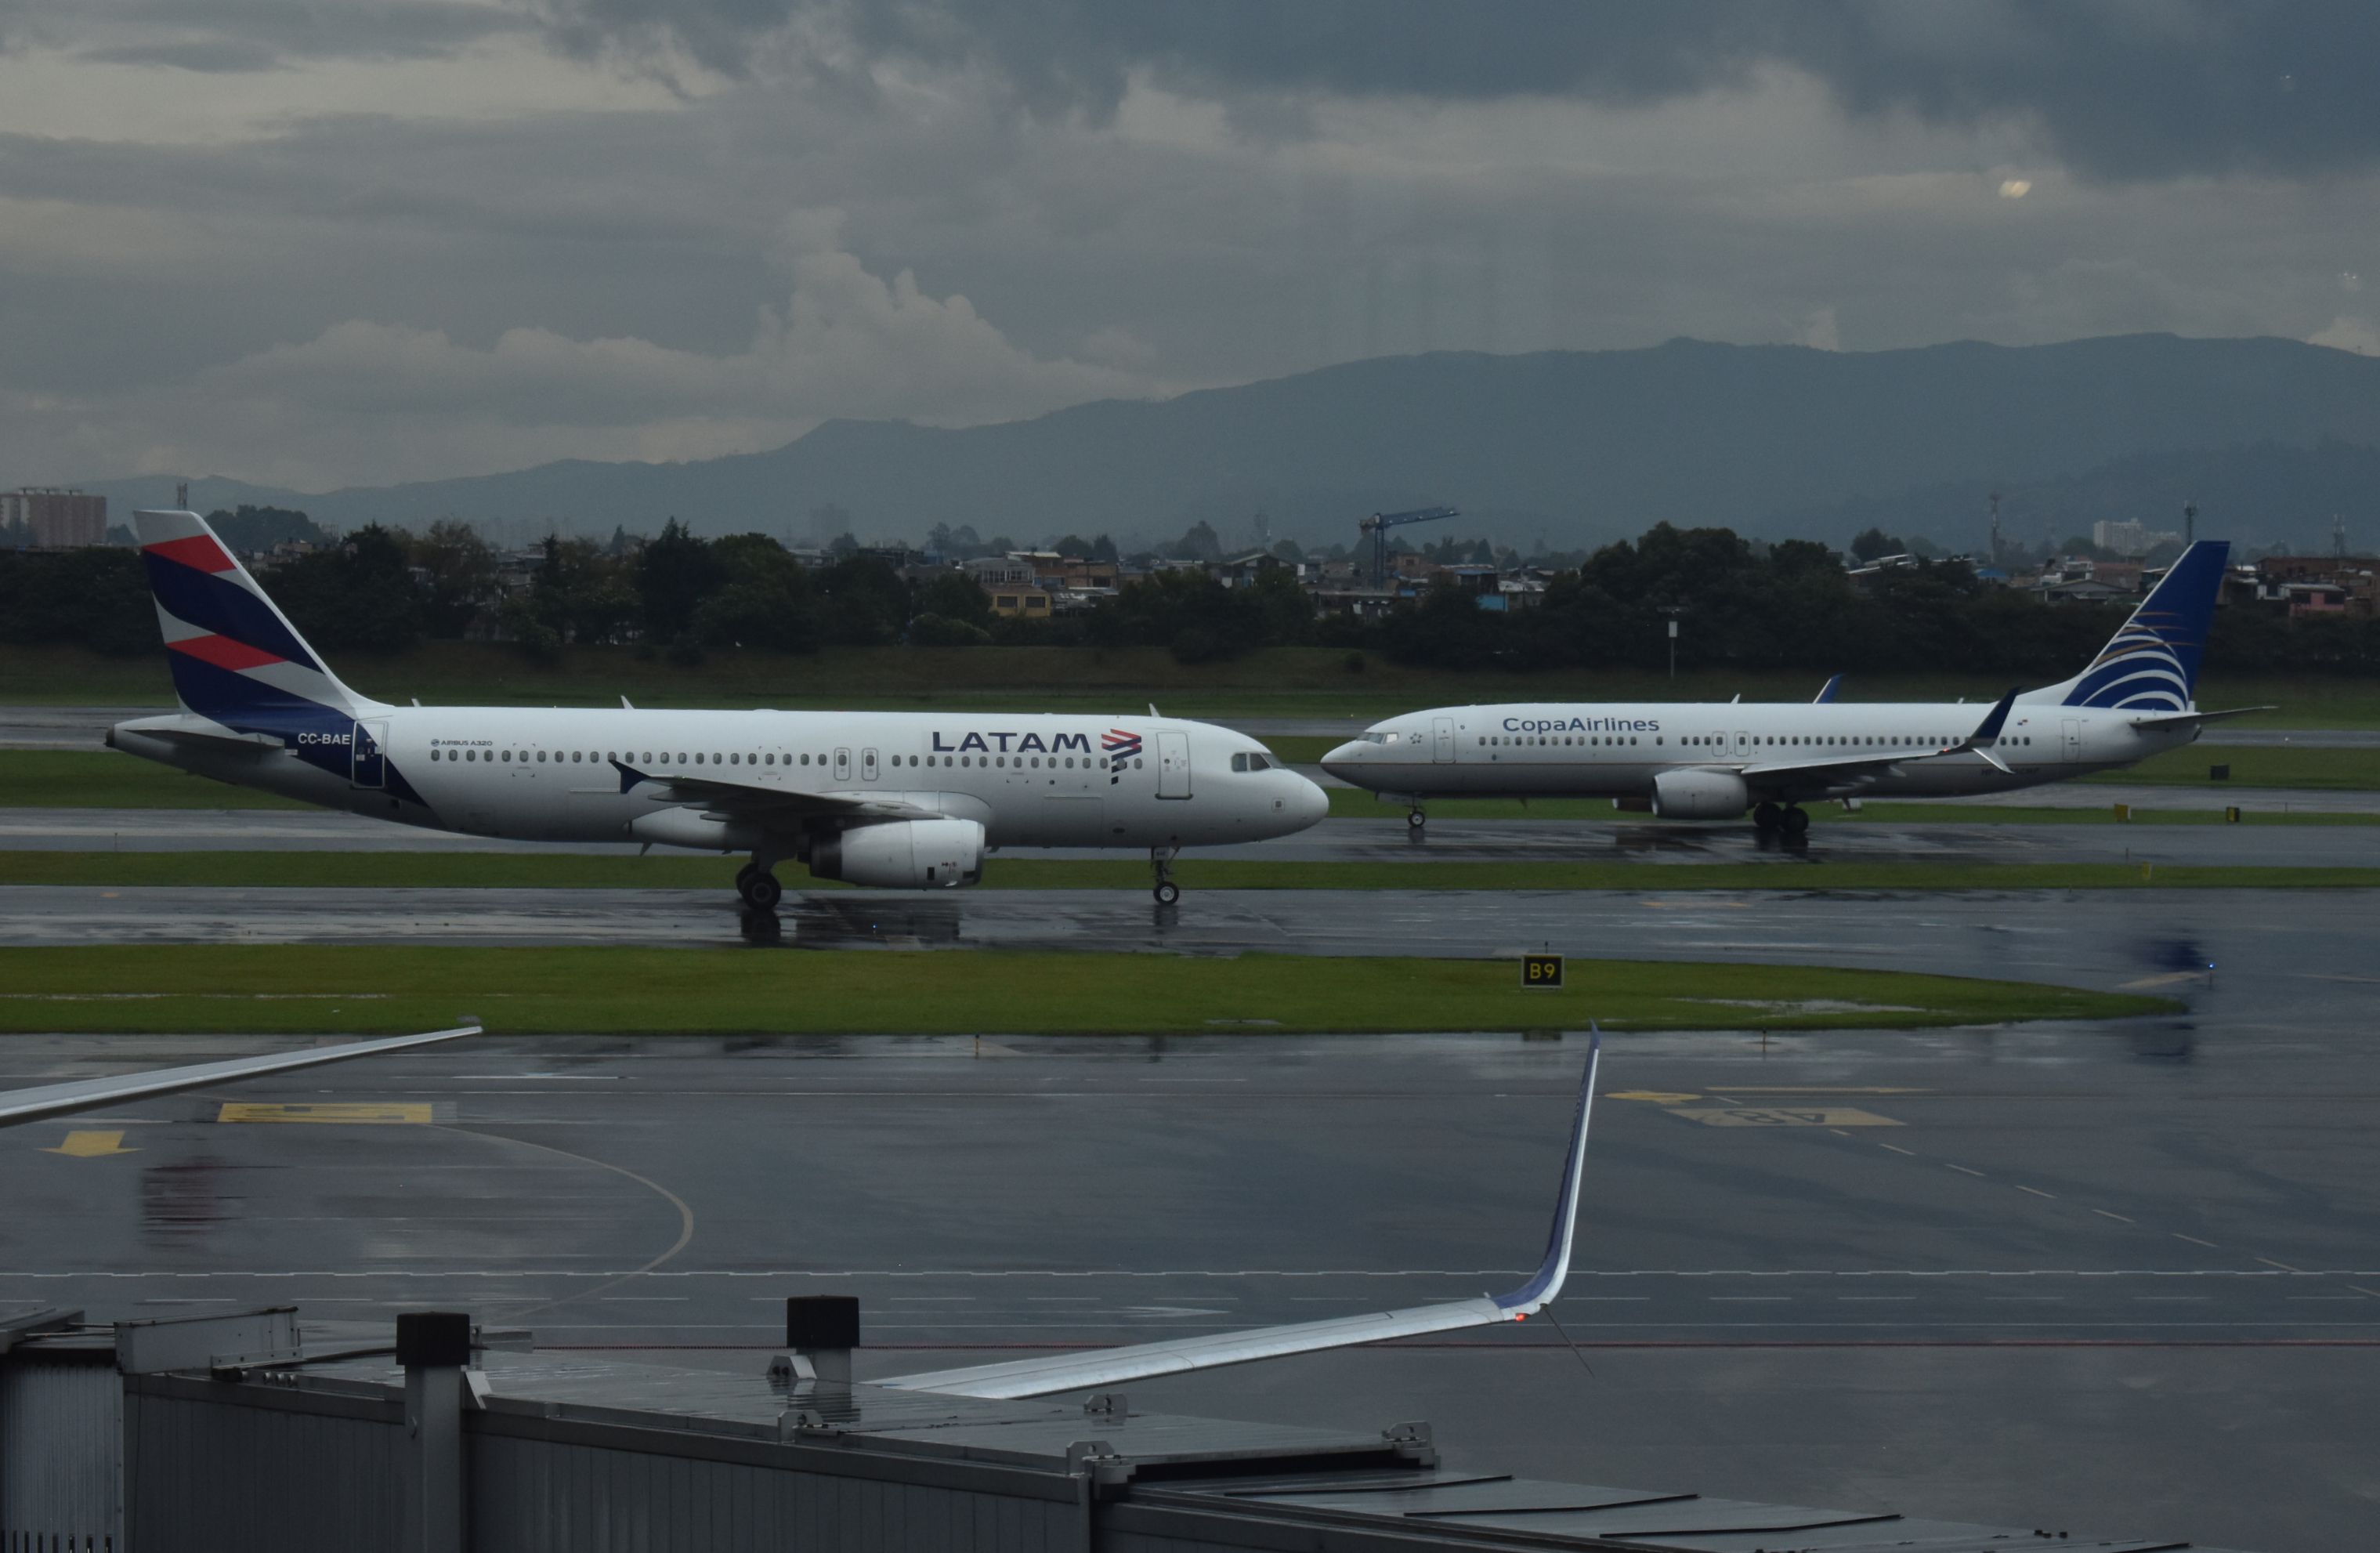 A LATAM aircraft and a Copa Airlines aircraft